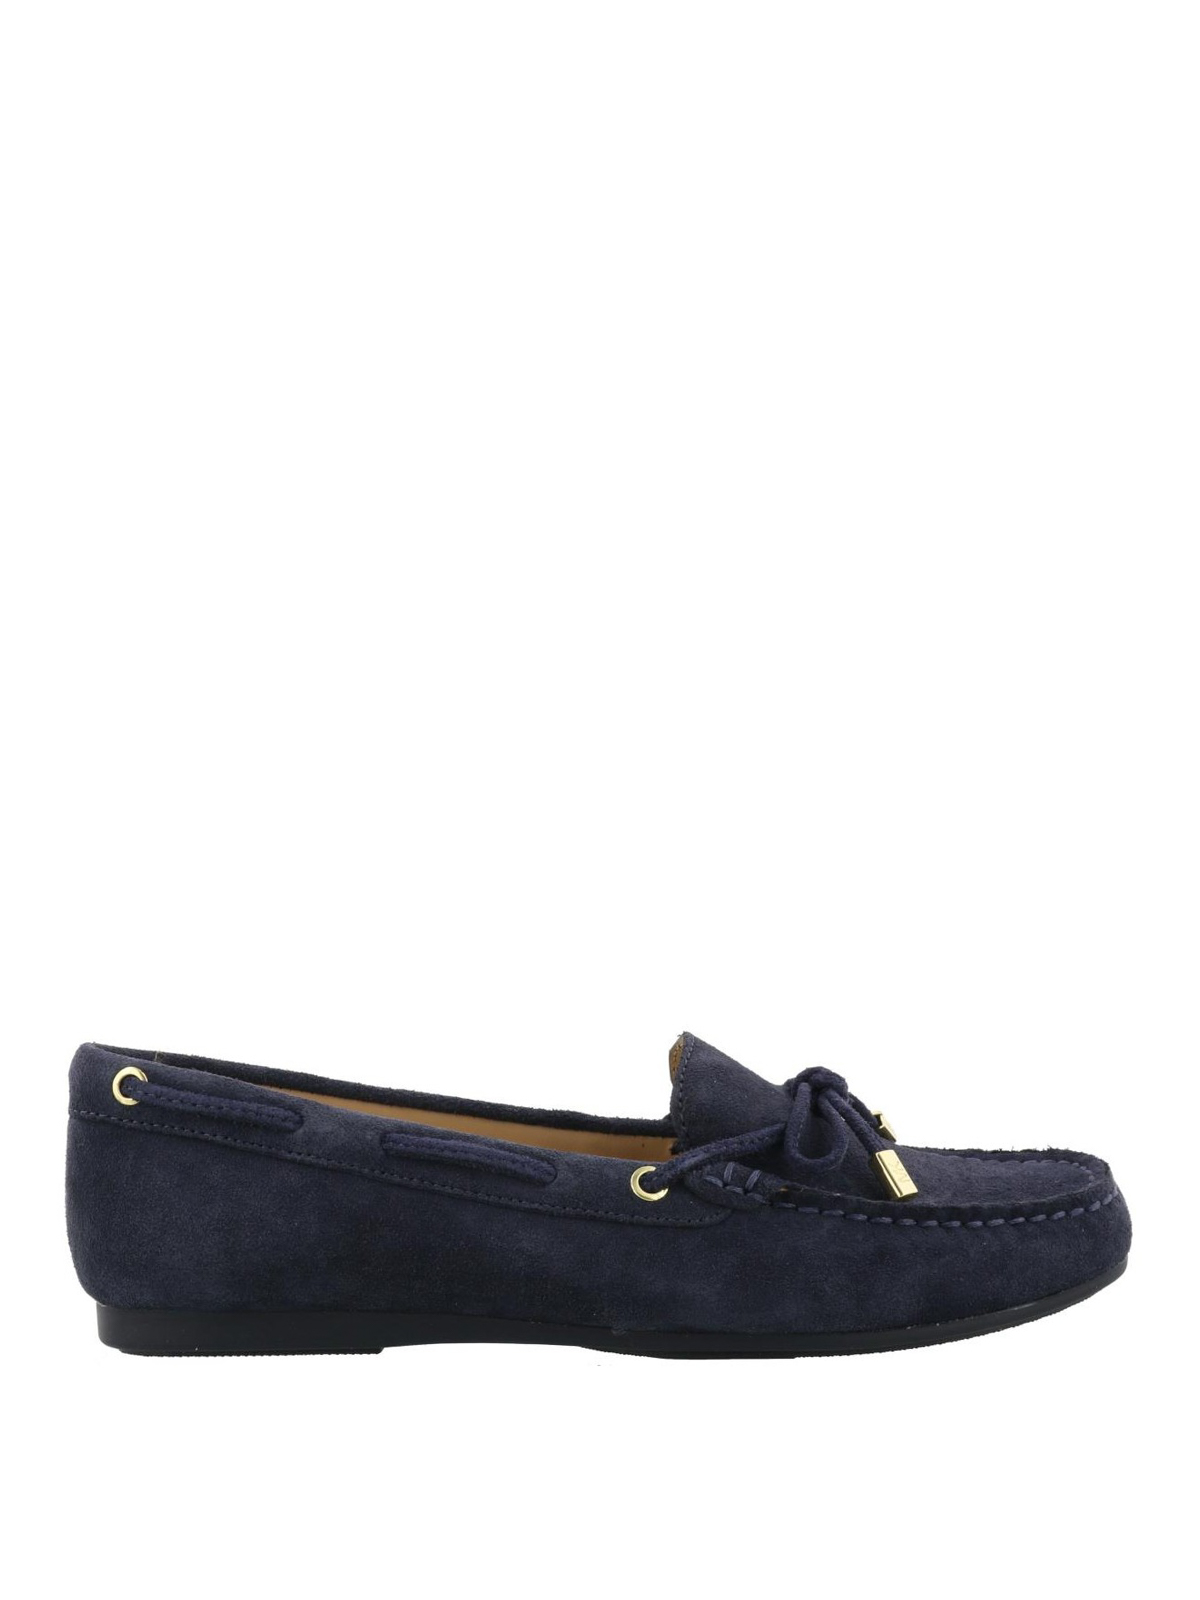 Loafers & Slippers Michael Kors - Sutton dark blue suede loafers -  40R7STFR1S414